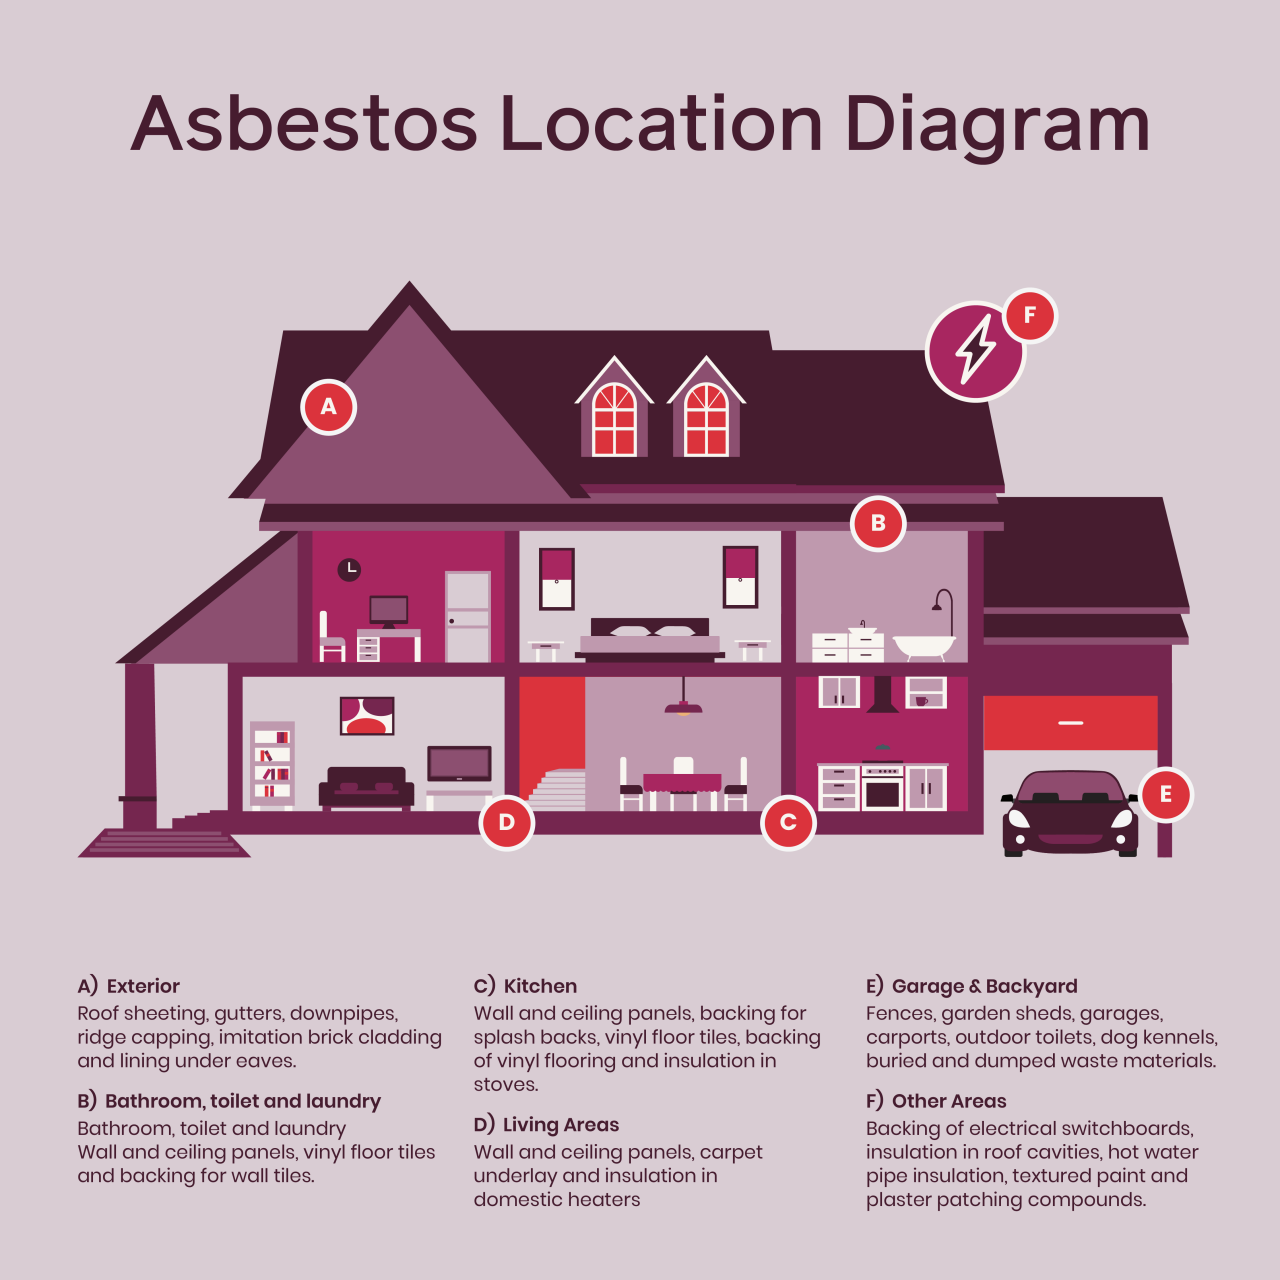 Asbestos location diagram: A) Exterior Roof sheeting, gutters, downpipes, ridge capping, imitation brick cladding and lining under eaves. B) Bathroom, toilet and laundry Wall and ceiling panels, vinyl floor tiles and backing for wall tiles. C) Kitchen Wall and ceiling panels, backing for splash backs, vinyl floor tiles, backing of vinyl flooring and insulation in stoves. D) Living Areas Wall and ceiling panels, carpet underlay and insulation in domestic heaters E) Garage & Backyard Fences, garden sheds, garages, carports, outdoor toilets, dog kennels, buried and dumped waste materials. F) Other Areas Backing of electrical switchboards, insulation in roof cavities, hot water pipe insulation, textured paint and plaster patching compounds.